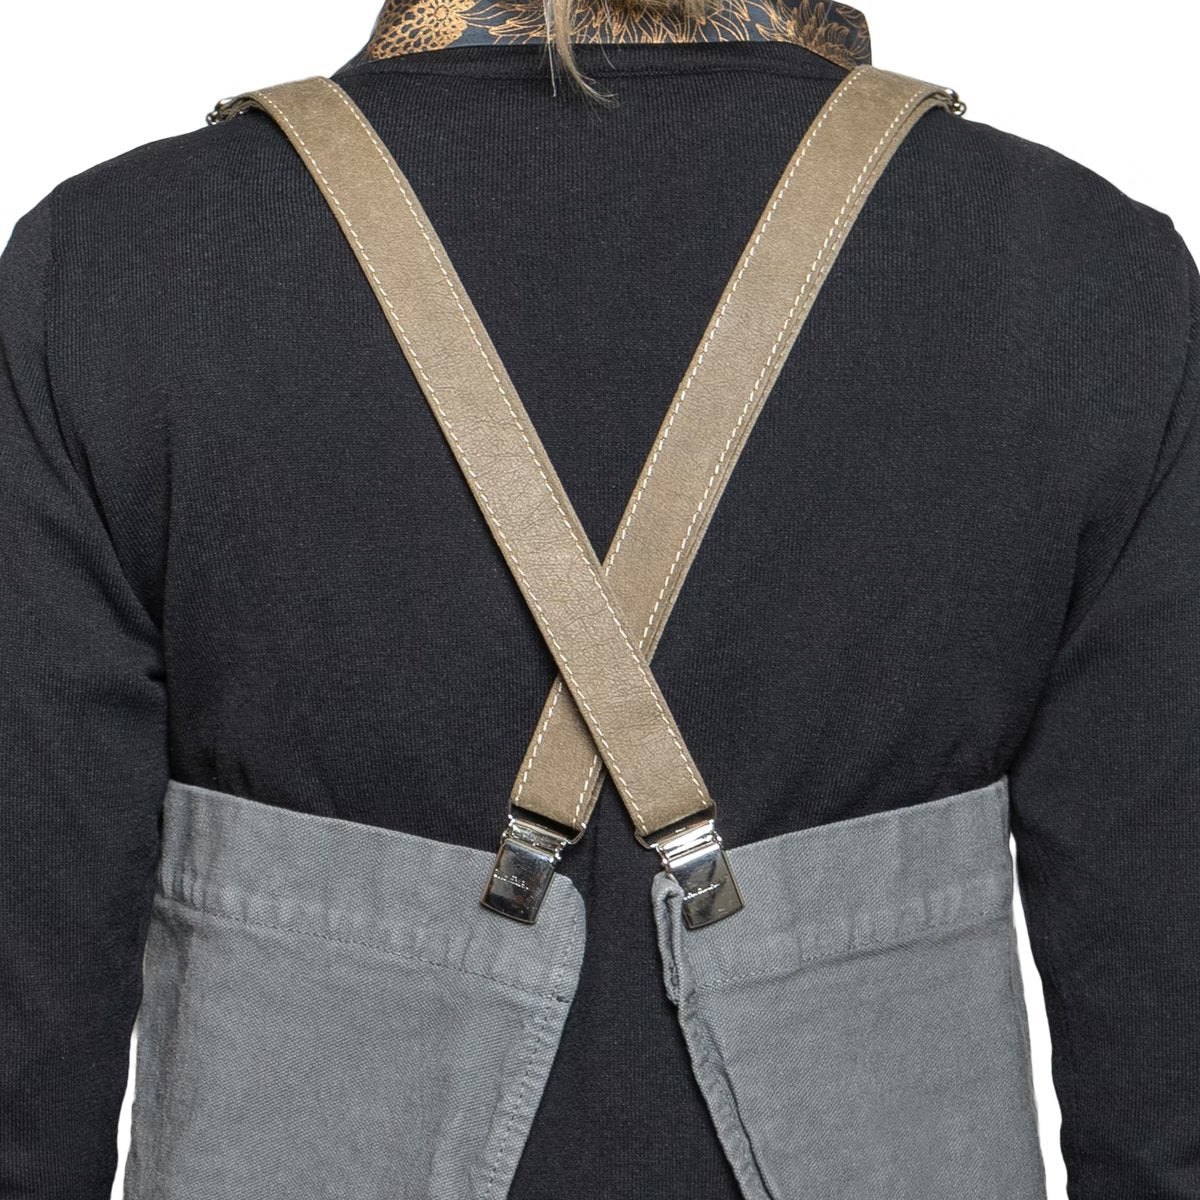 A person is shown from the back wearing a black long-sleeved t-shirt and a washable paper apron with washable paper and metal clip straps. The apron is grey in colour with beige straps